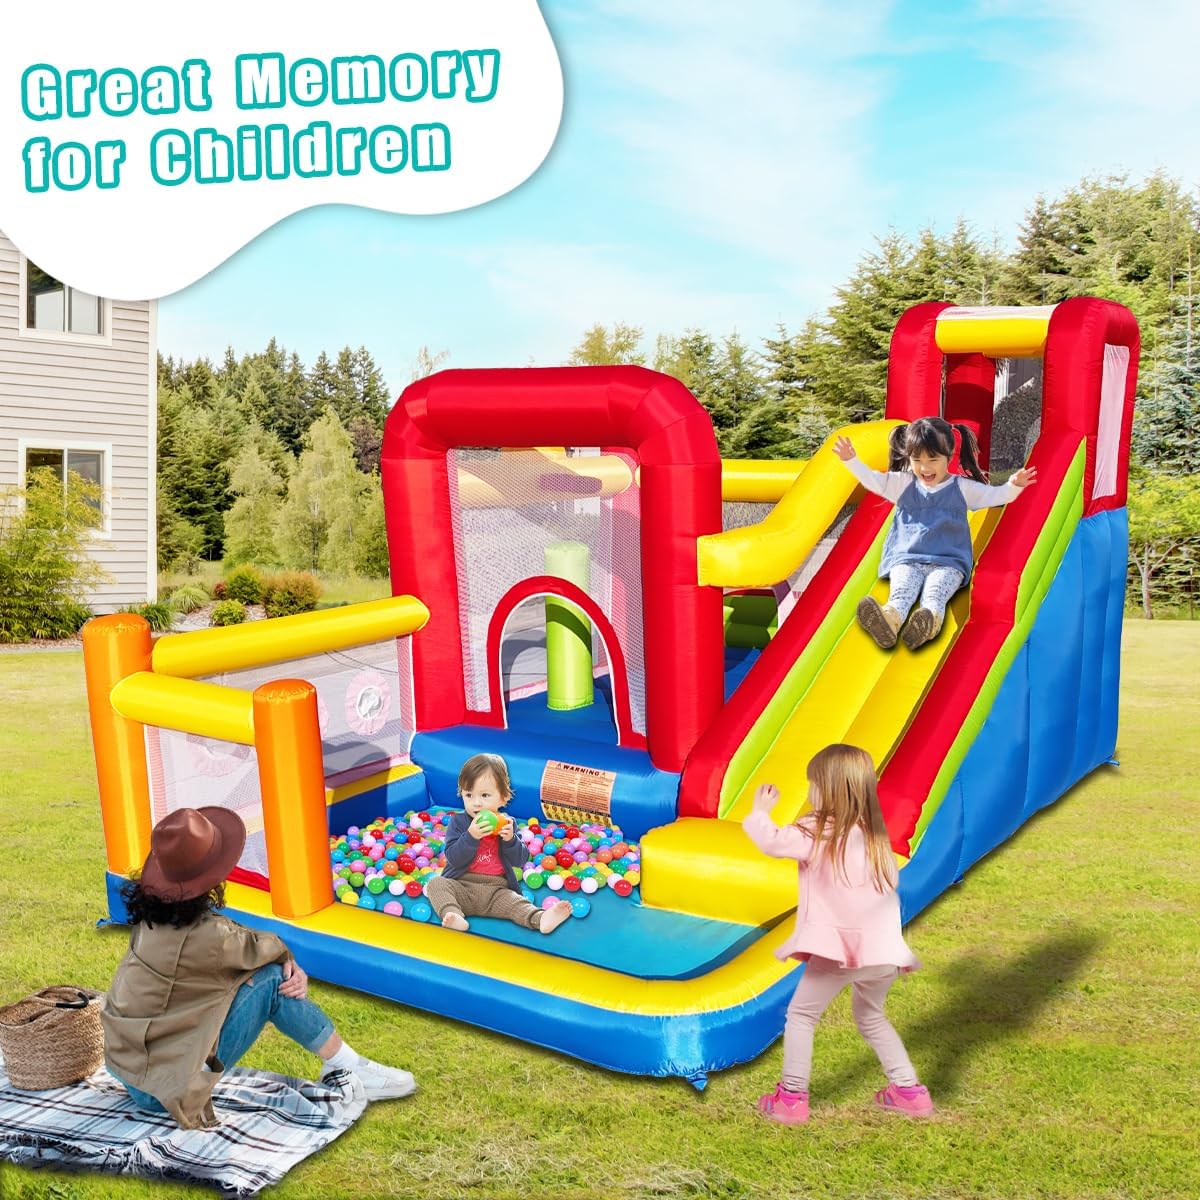 Baralir Bouncy Castle, Inflatable Bounce Castle with Blower for Kids, Blow Up Jumping Bouncer with Slide, Climbing Wall, Obstacles, Trampoline, Ball Pit Pool for Indoor Outdoor